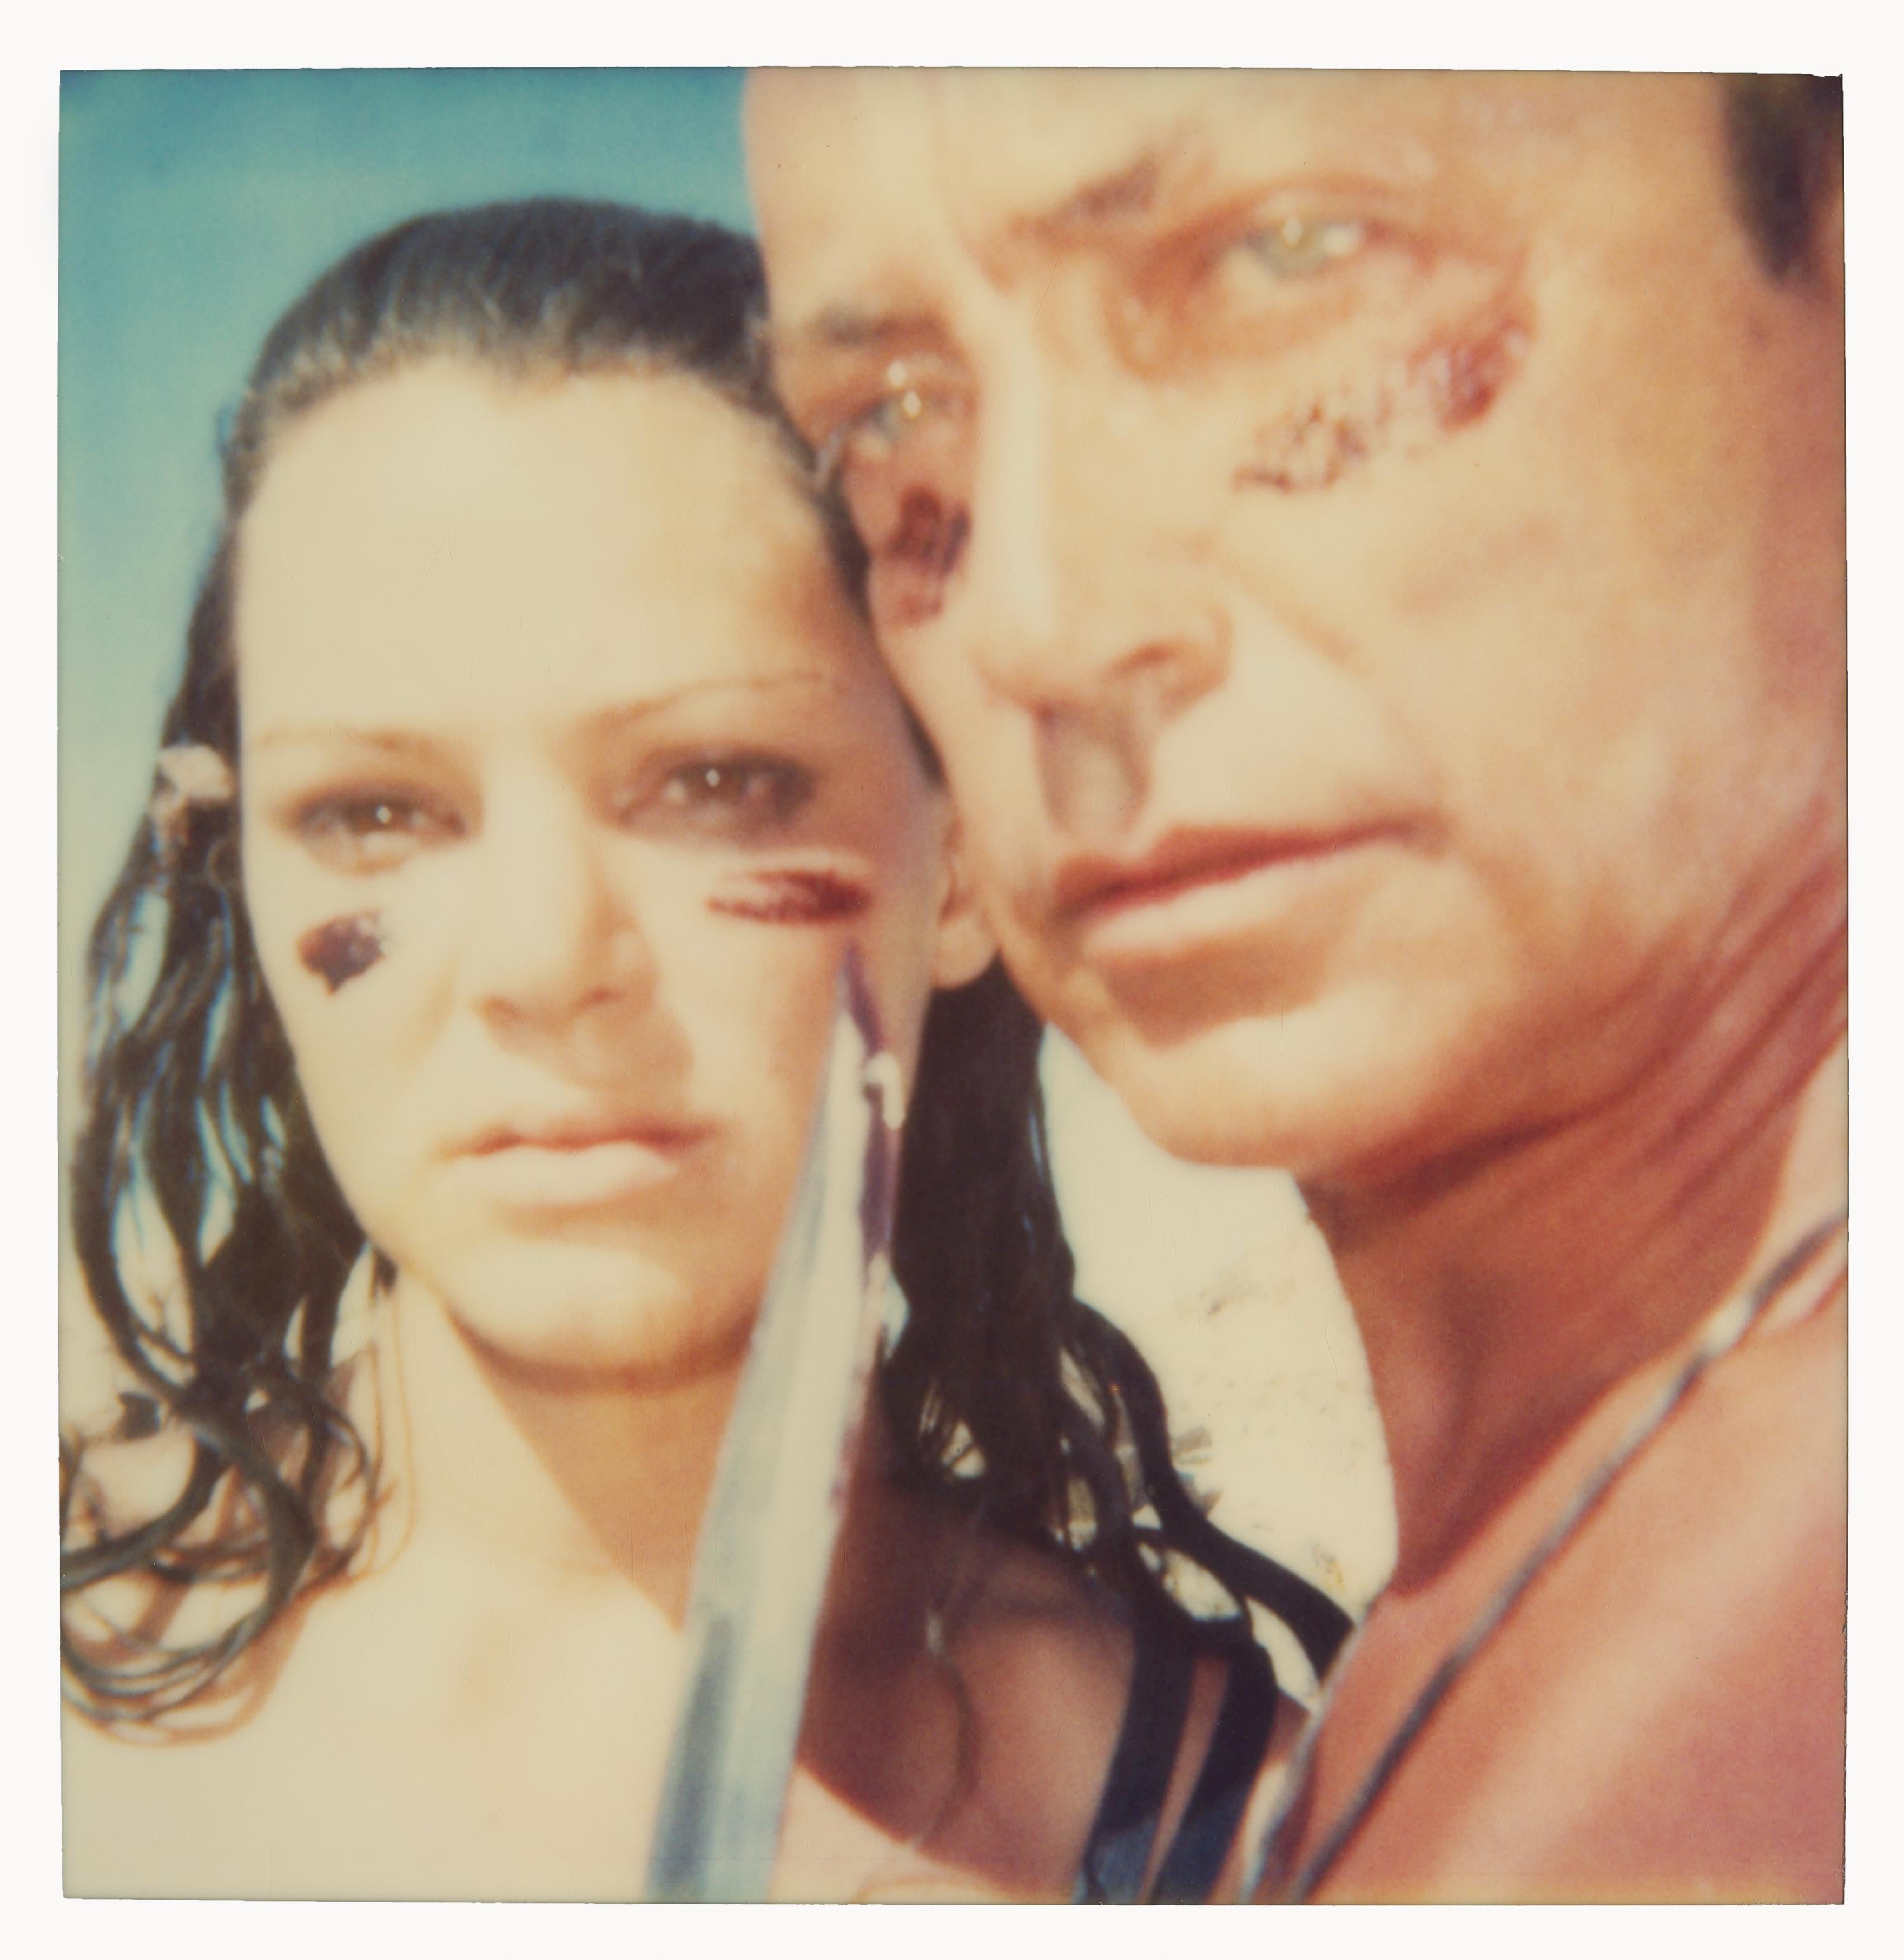 'Penelope and Hans' from the movie Immaculate Springs - starring Udo Kier